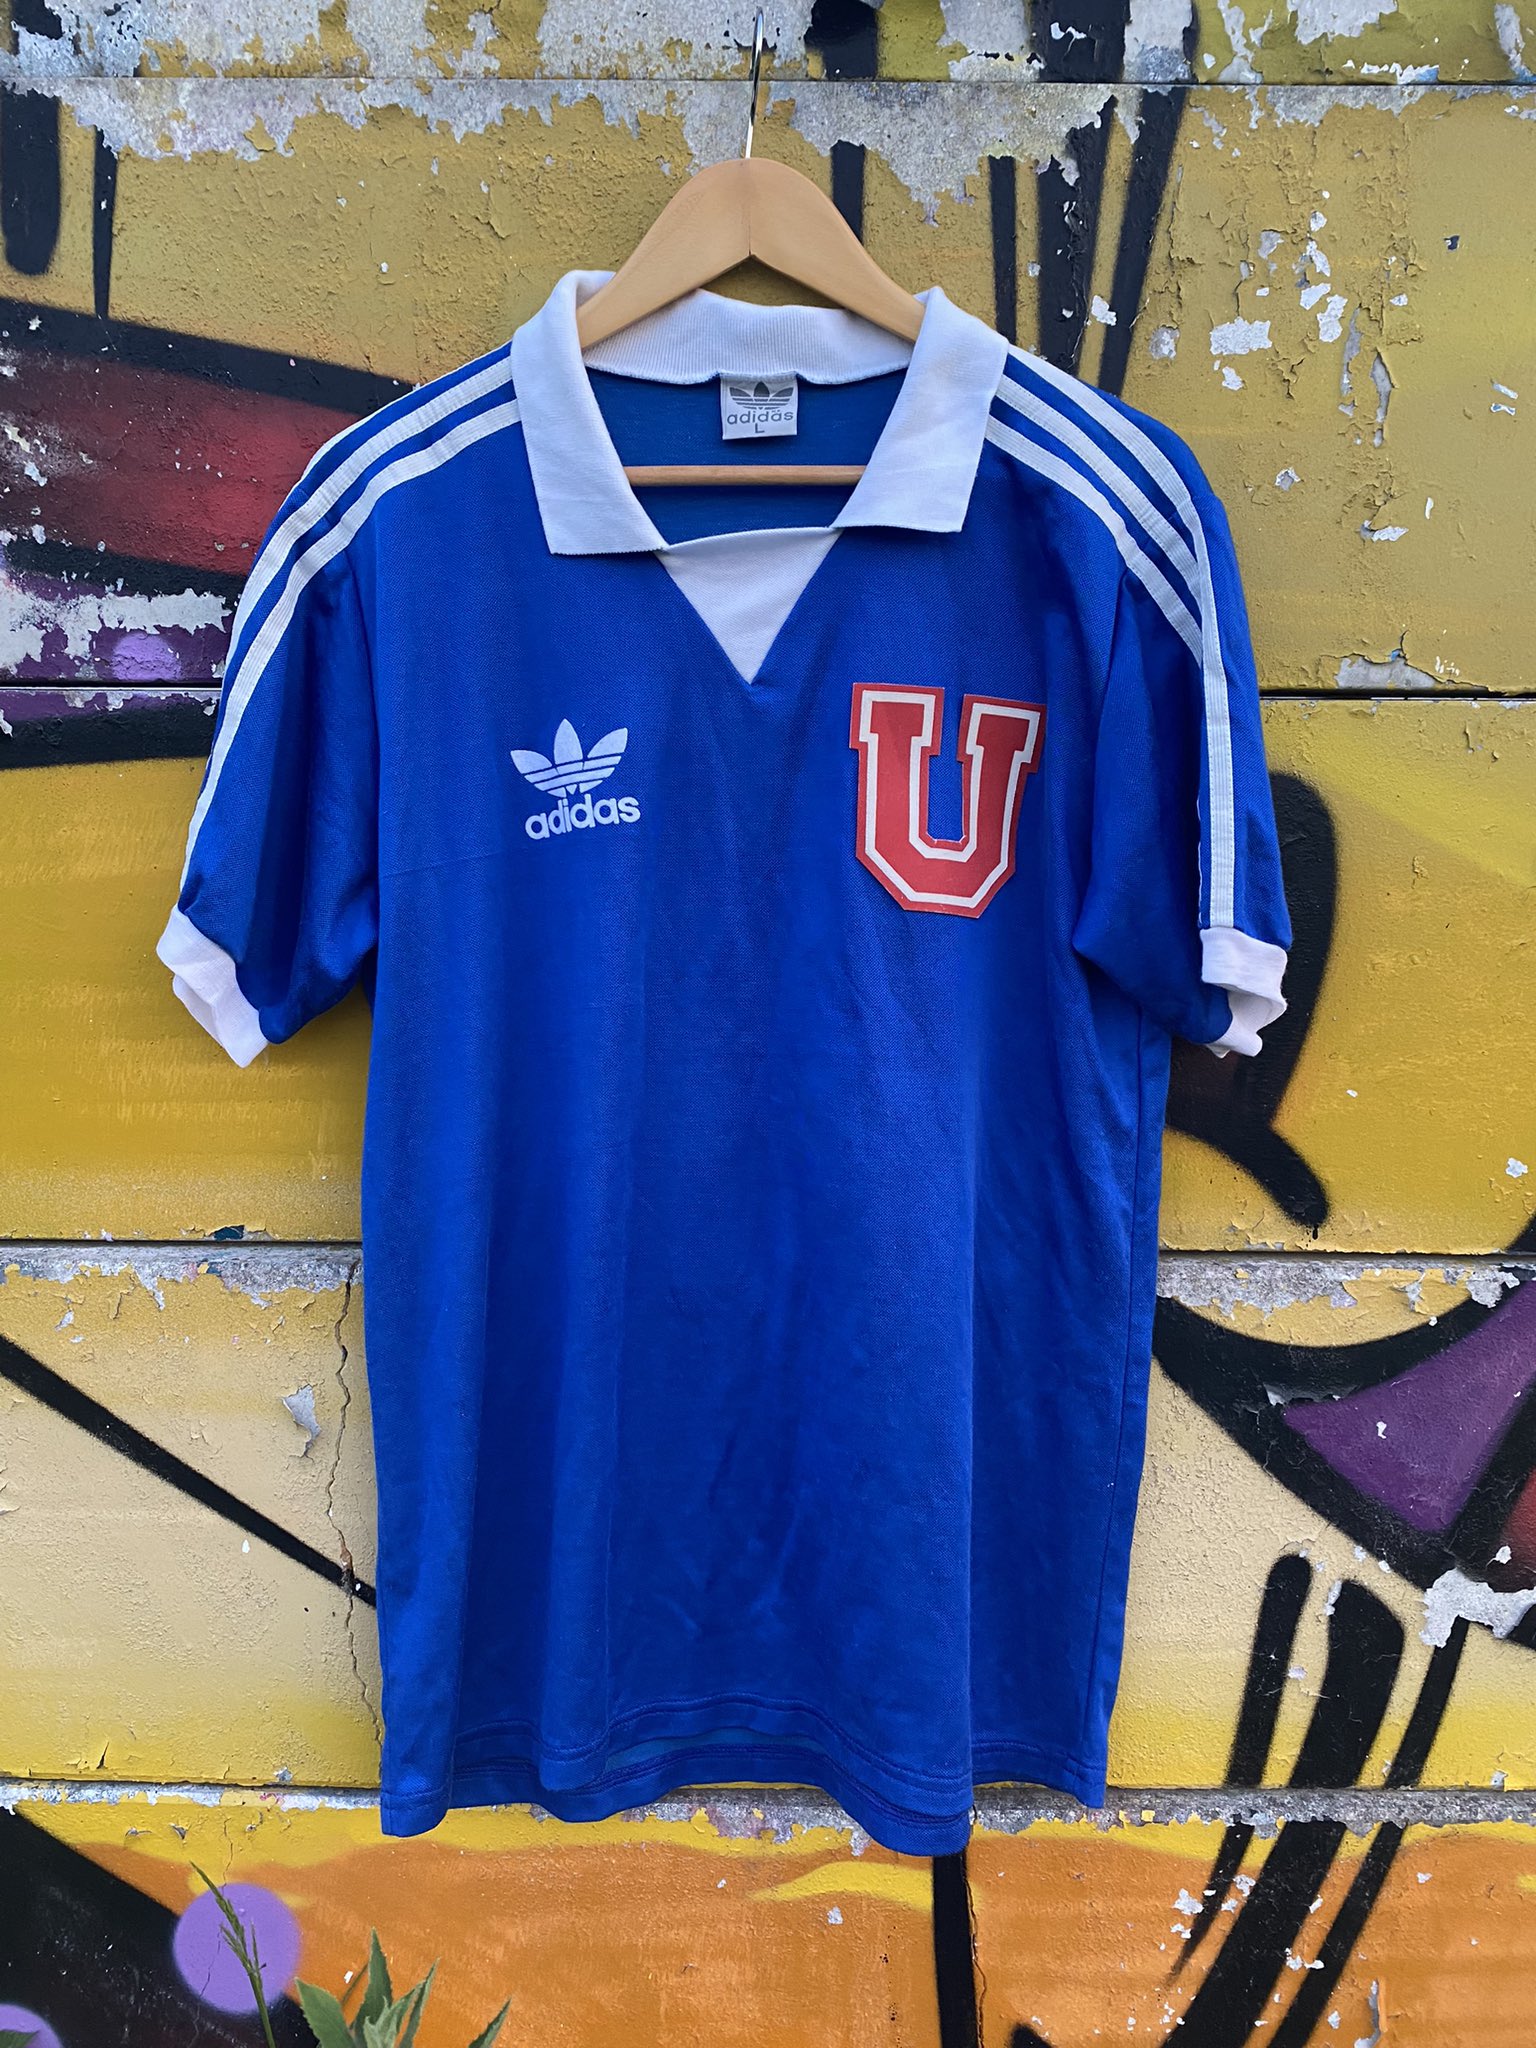 lana caballo de fuerza Superior The Classic Trefoil on Twitter: "1988 @udechile home shirt. Managed by a  youthful Manuel Pellegrini, his month long hiatus to Europe to undertake  coaching courses ultimately contributed to Los Azules' relegation from